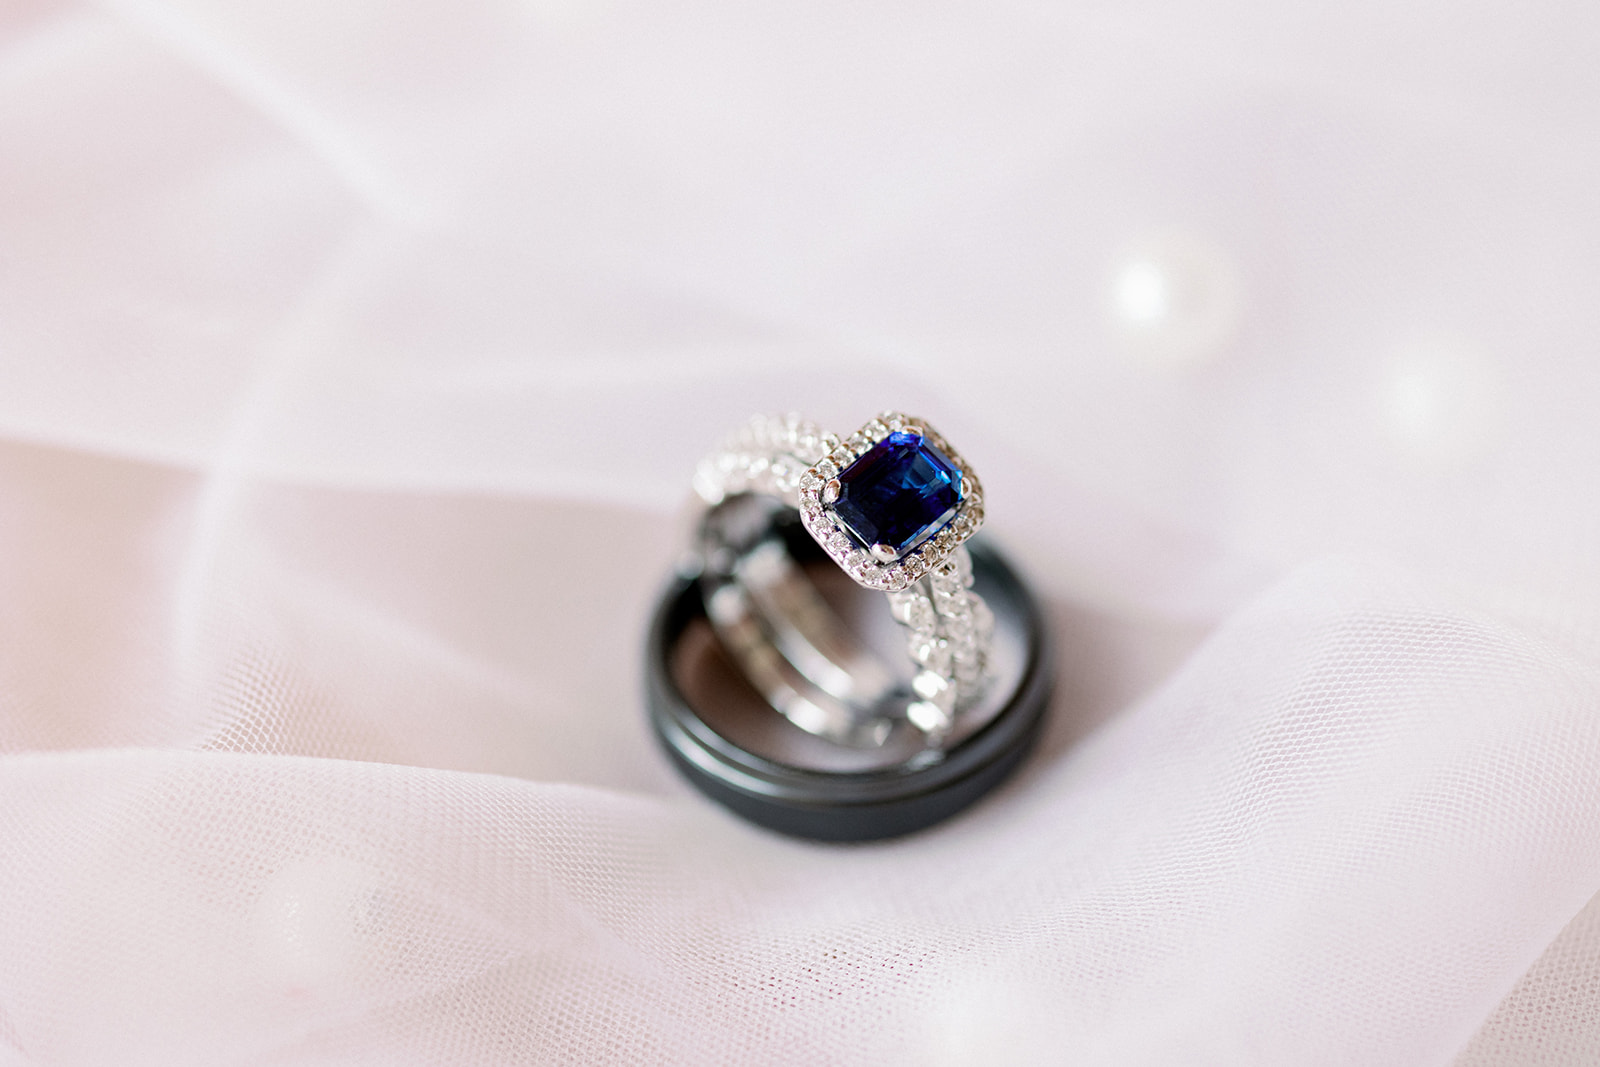 Two rings that signify the connection between partners, photographed cincinnati destination wedding photographer